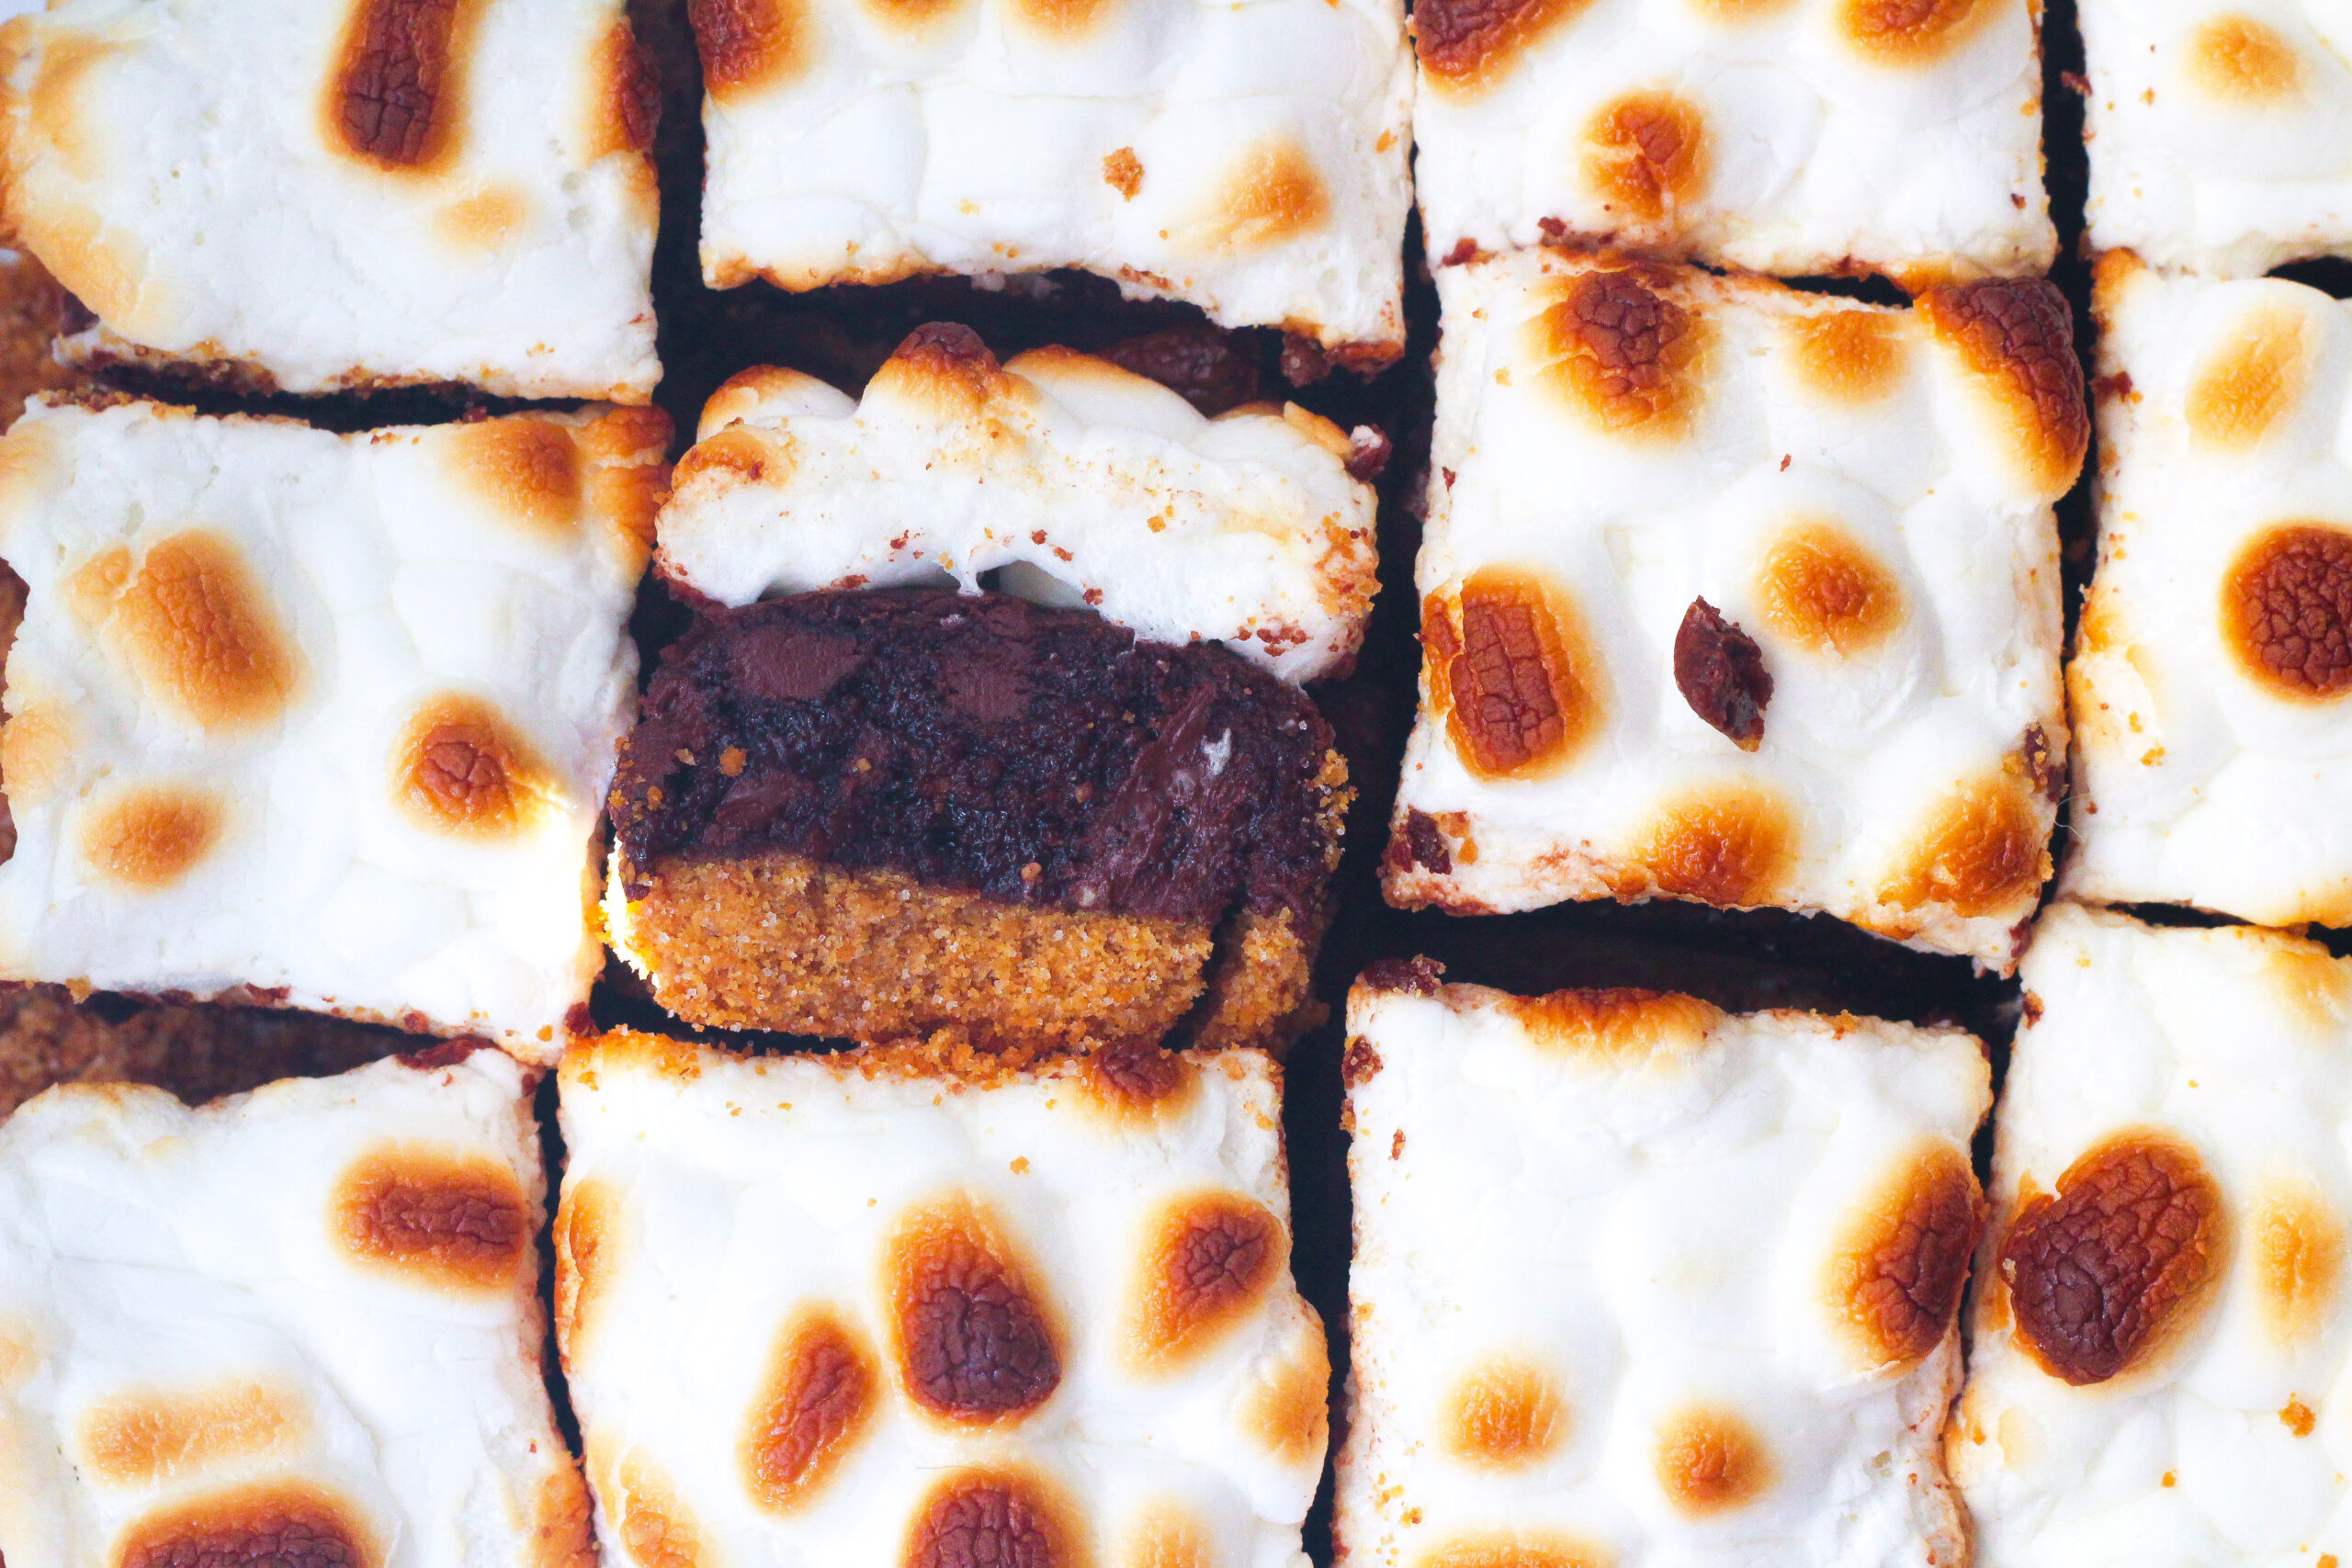 Top down view of the toasted marshmallow top of Bailey's S'mores Brownies, with one brownie turned sideways to see the three layers - the light brown graham cracker crust, the dark brown brownie in the center, and the white marshmallow topping